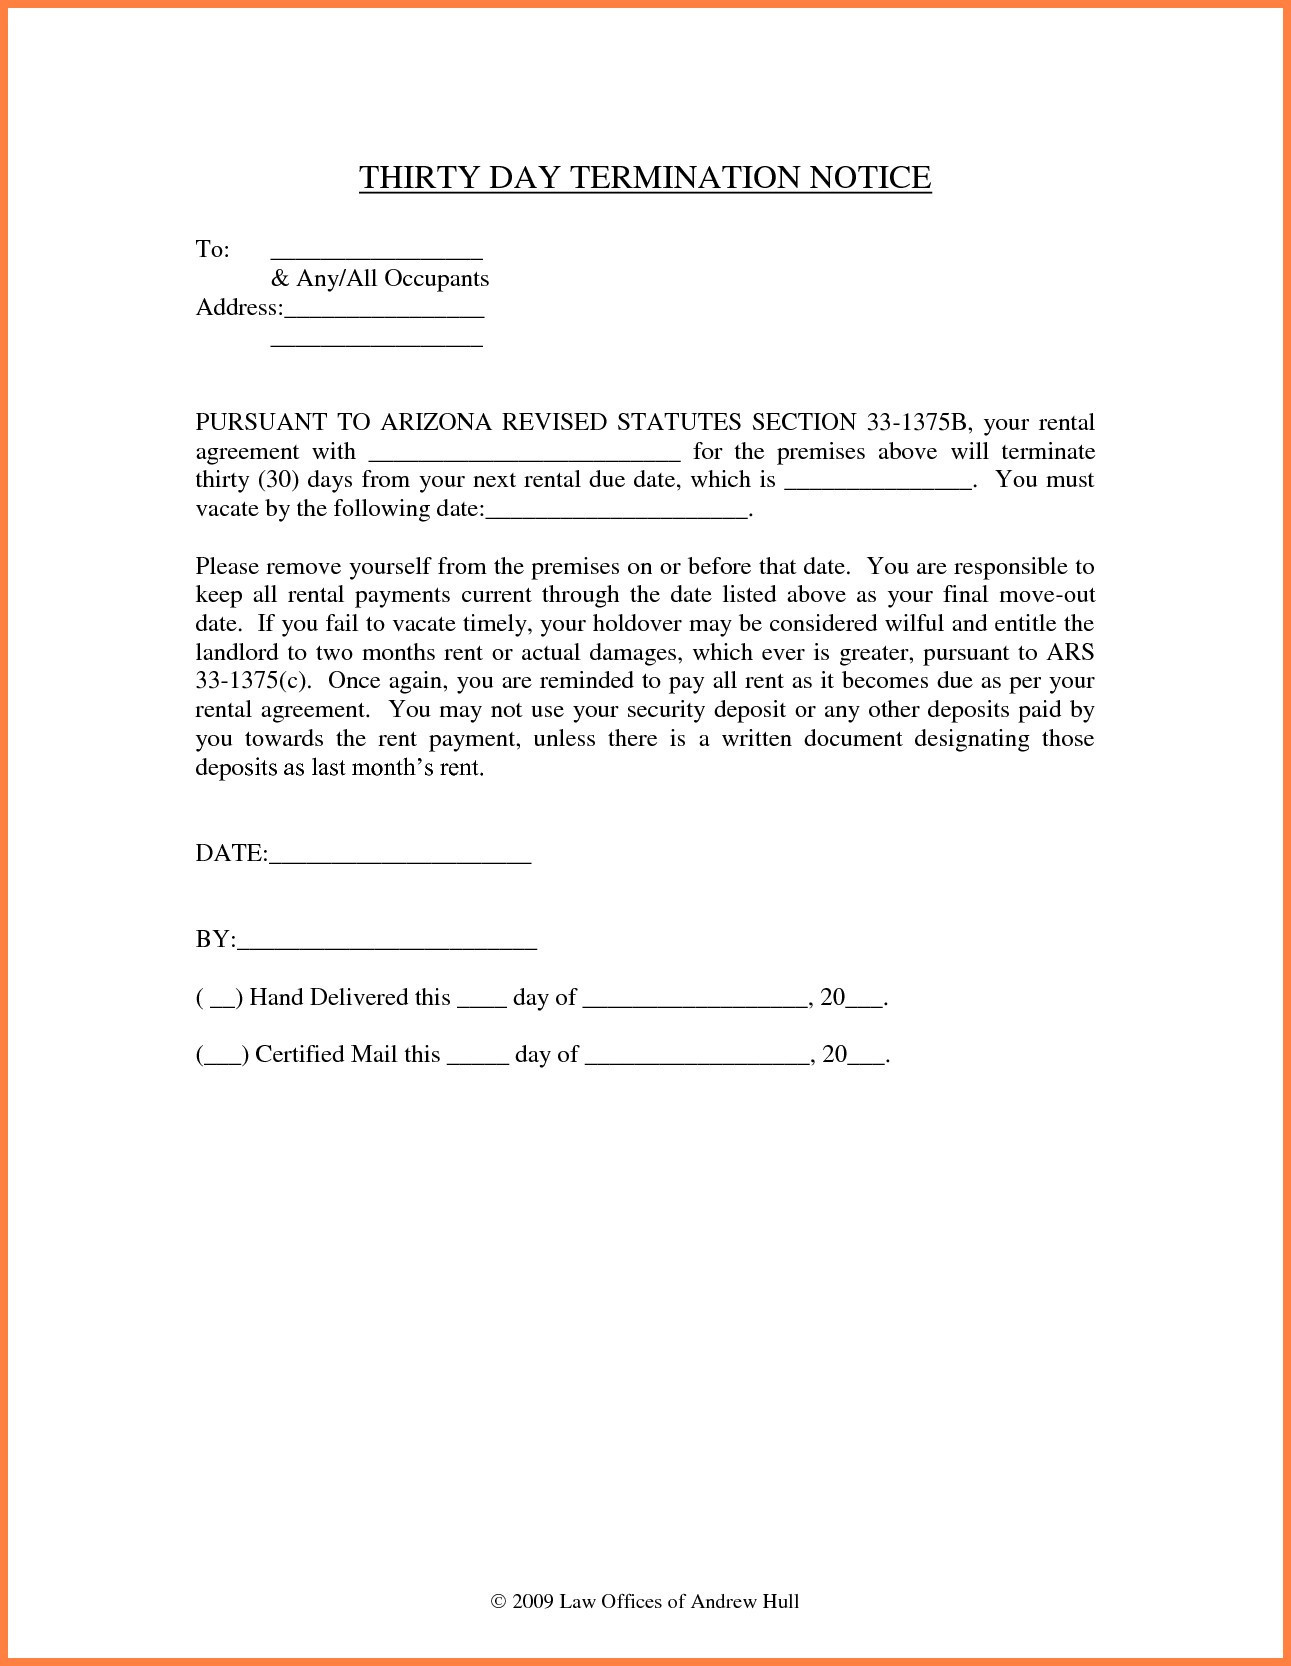 Notice to Vacate Letter to Tenant Template - Notice to Vacate Letter to Tenant Template Best Termination